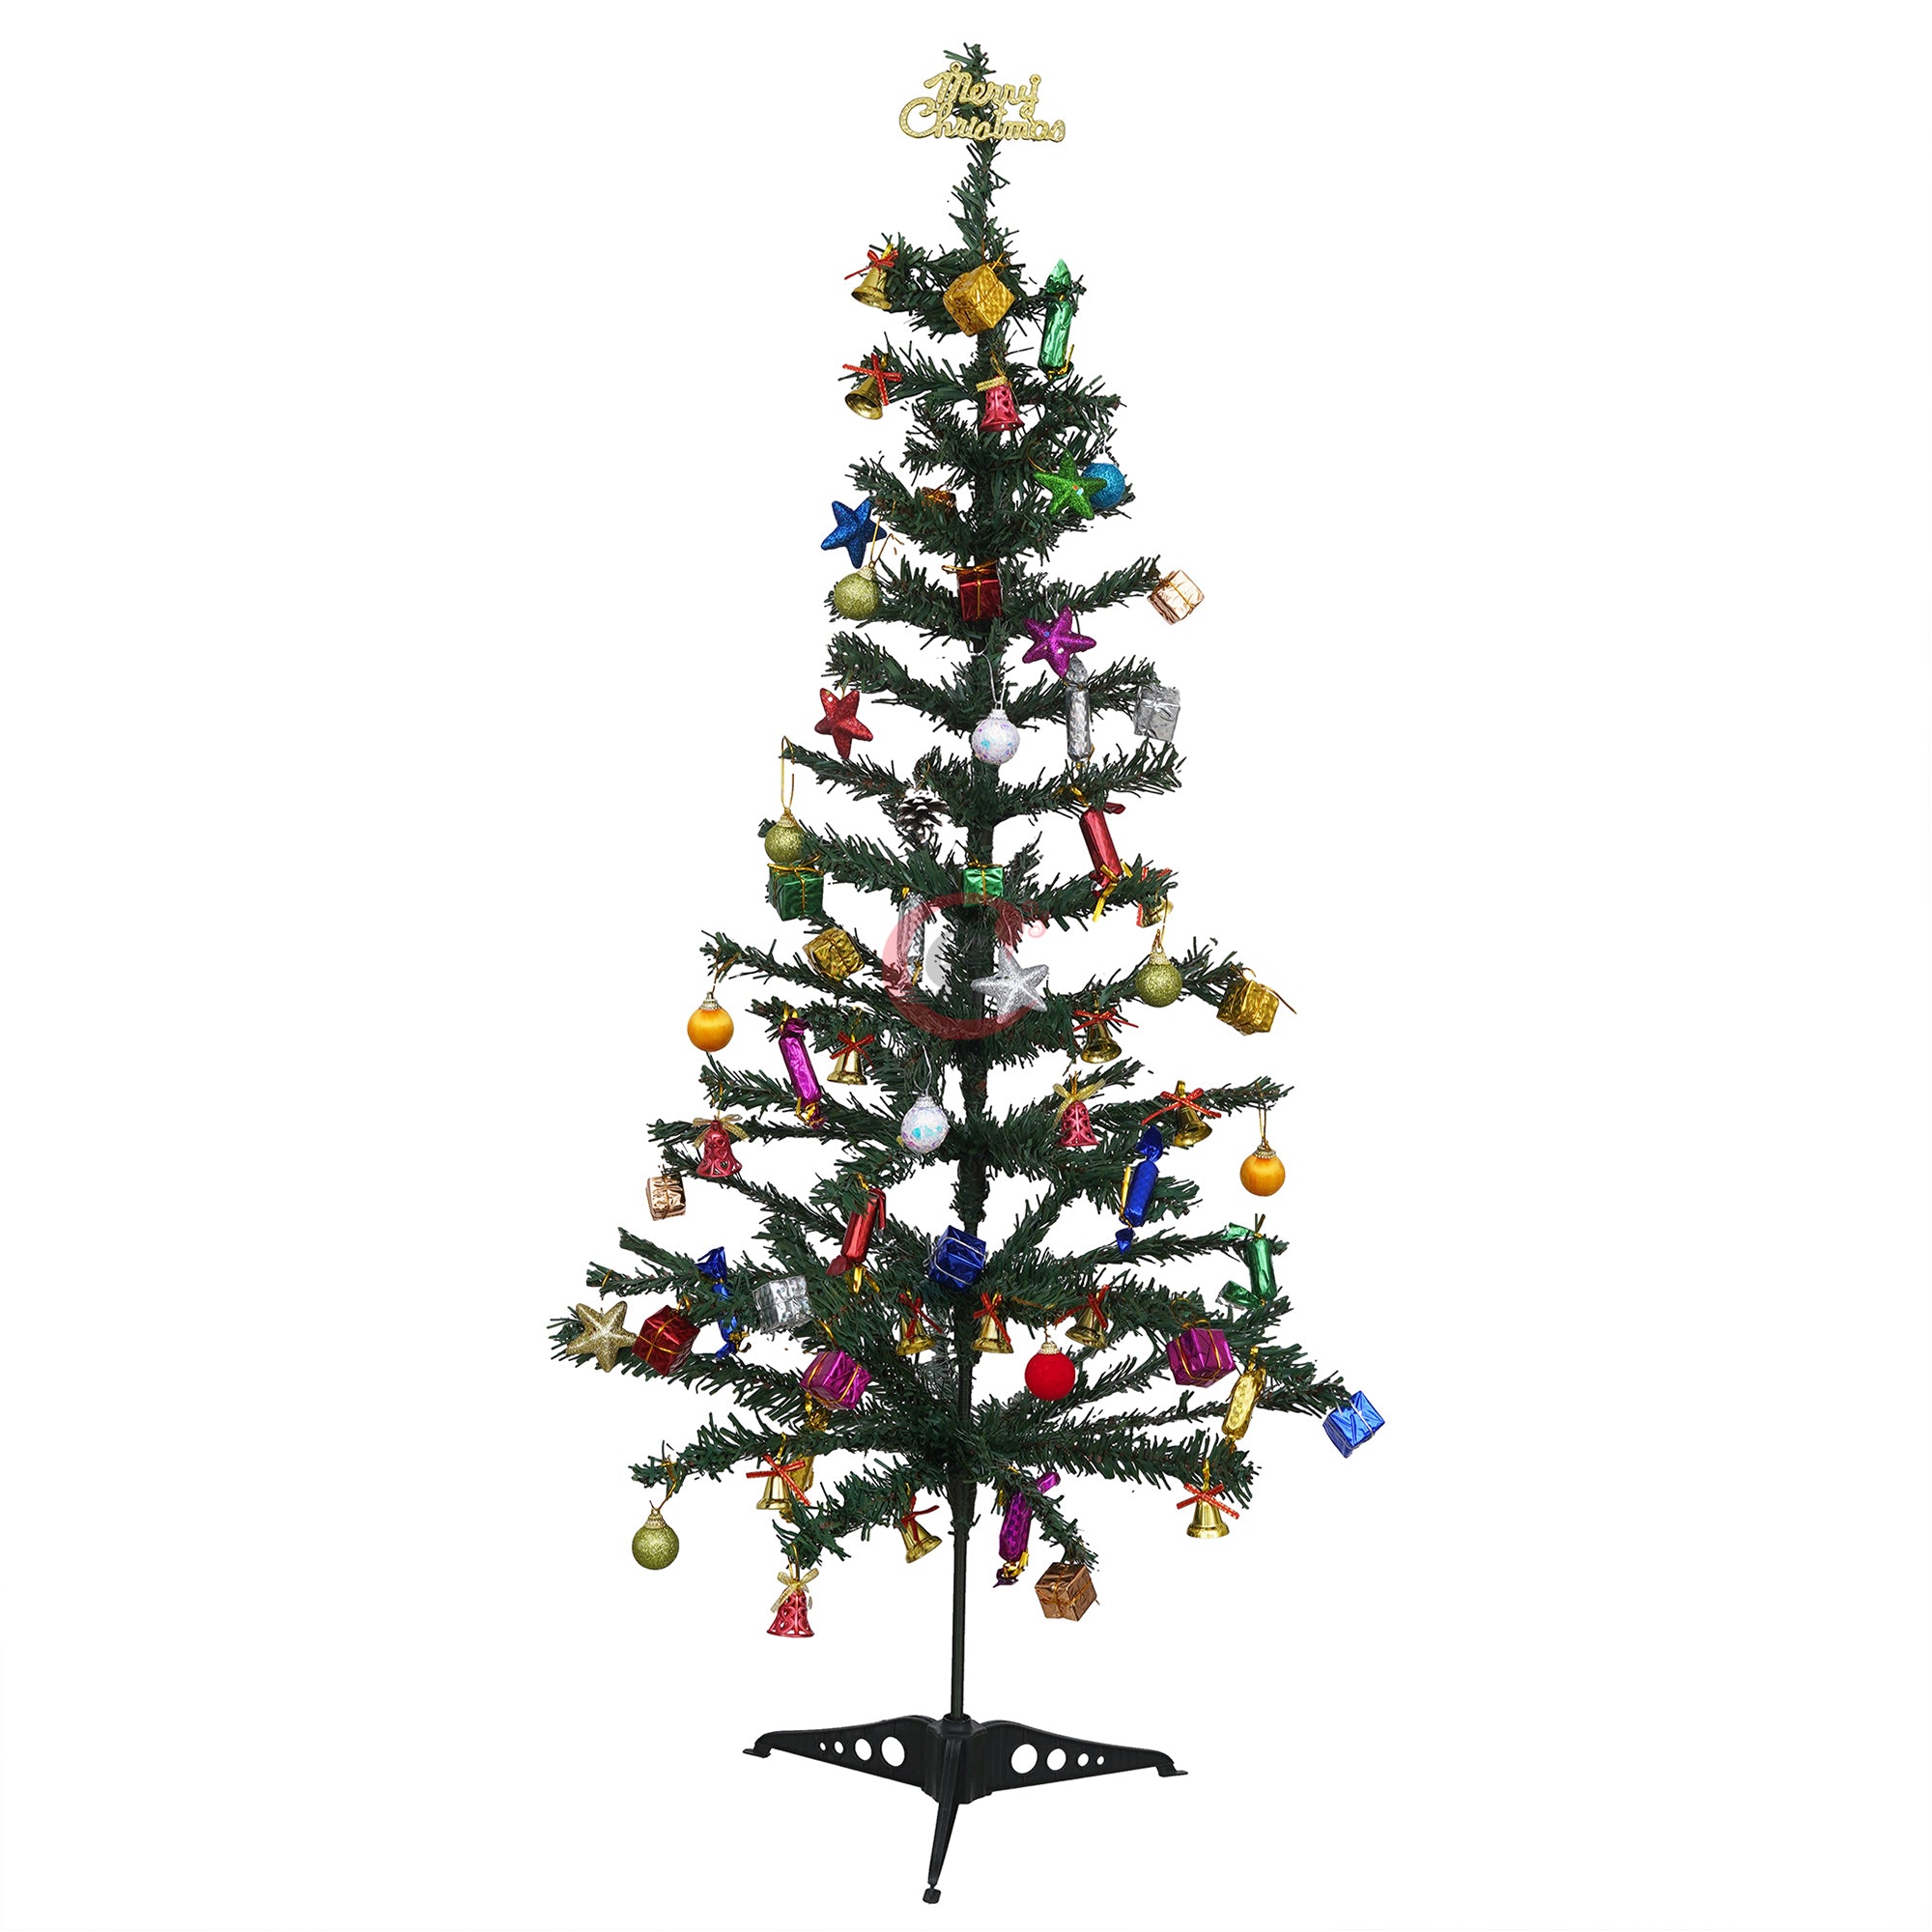 eCraftIndia 3 Feet Green Artificial Christmas Tree Xmas Pine Tree with Stand and 60 Christmas Decoration Ornaments Props - Merry Christmas Decoration Item for Home, Office, and Church 2